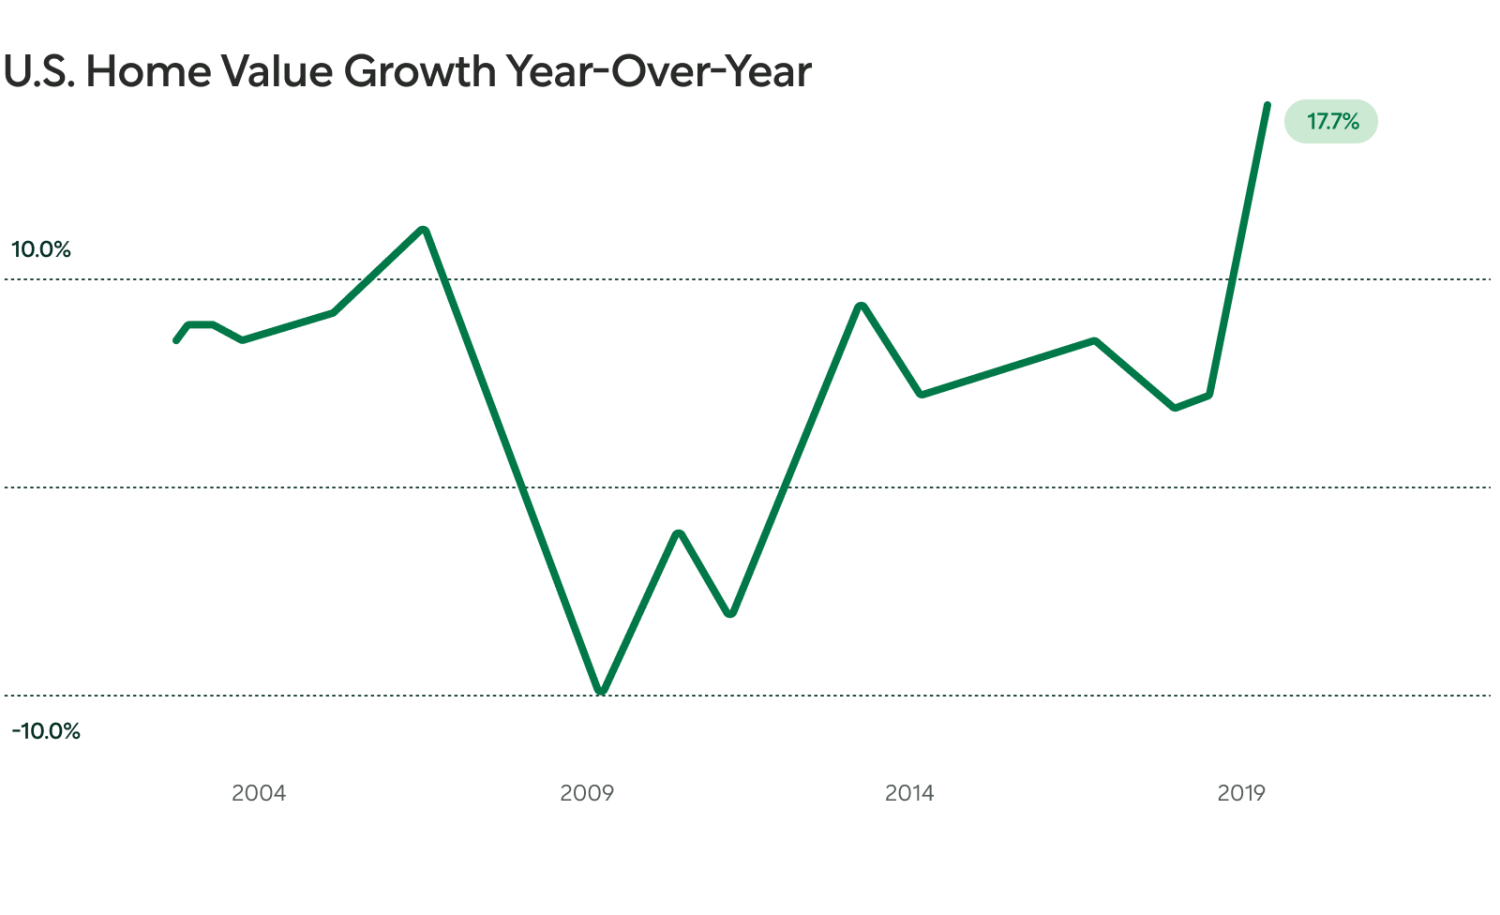 Line Graph Showing U.S. Home Value Growth Year-Over-Year